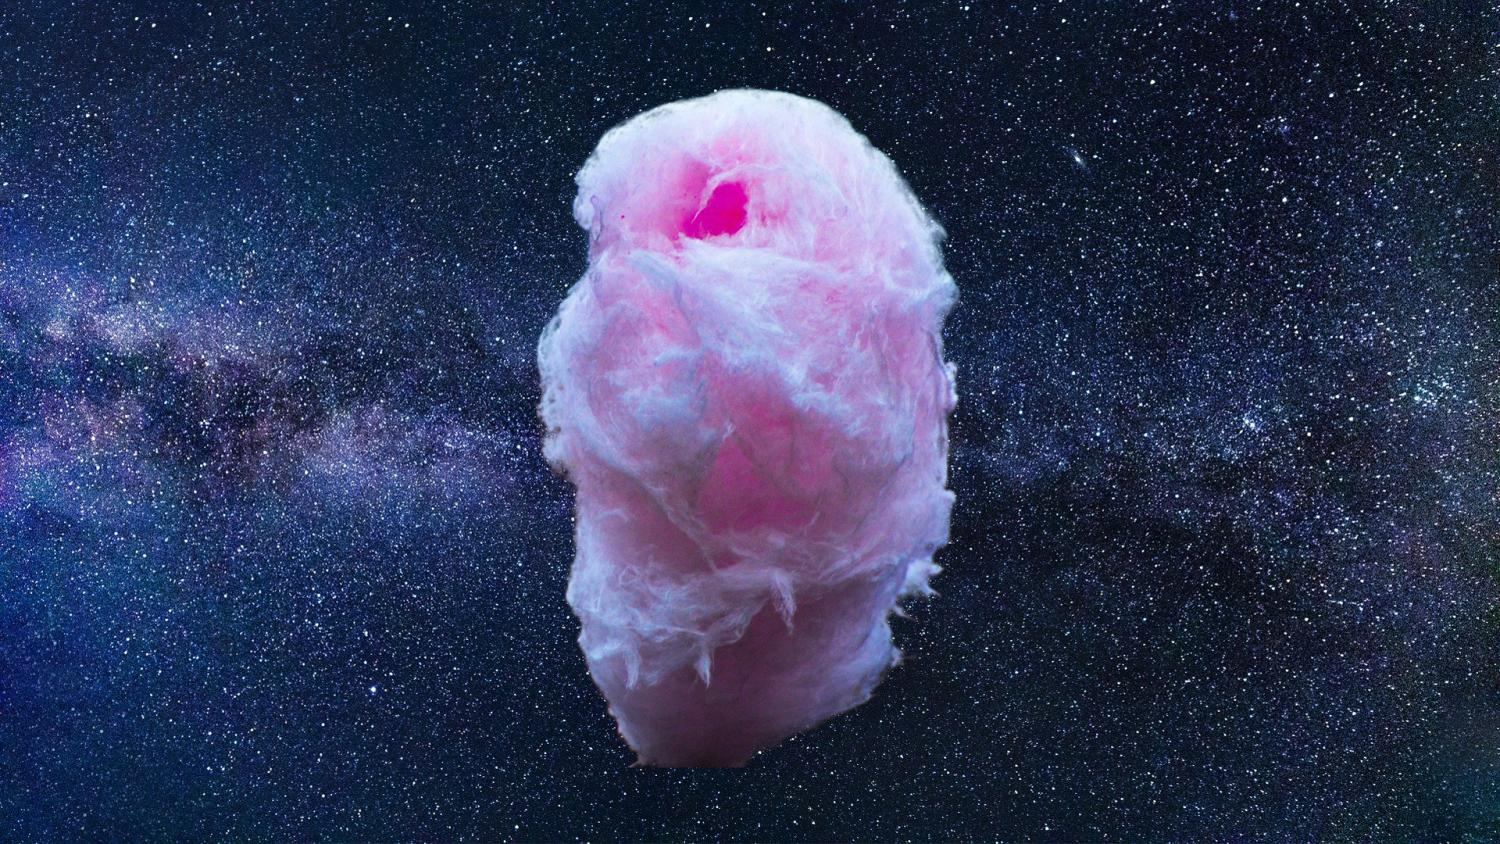 A ball of cotton candy floating in space